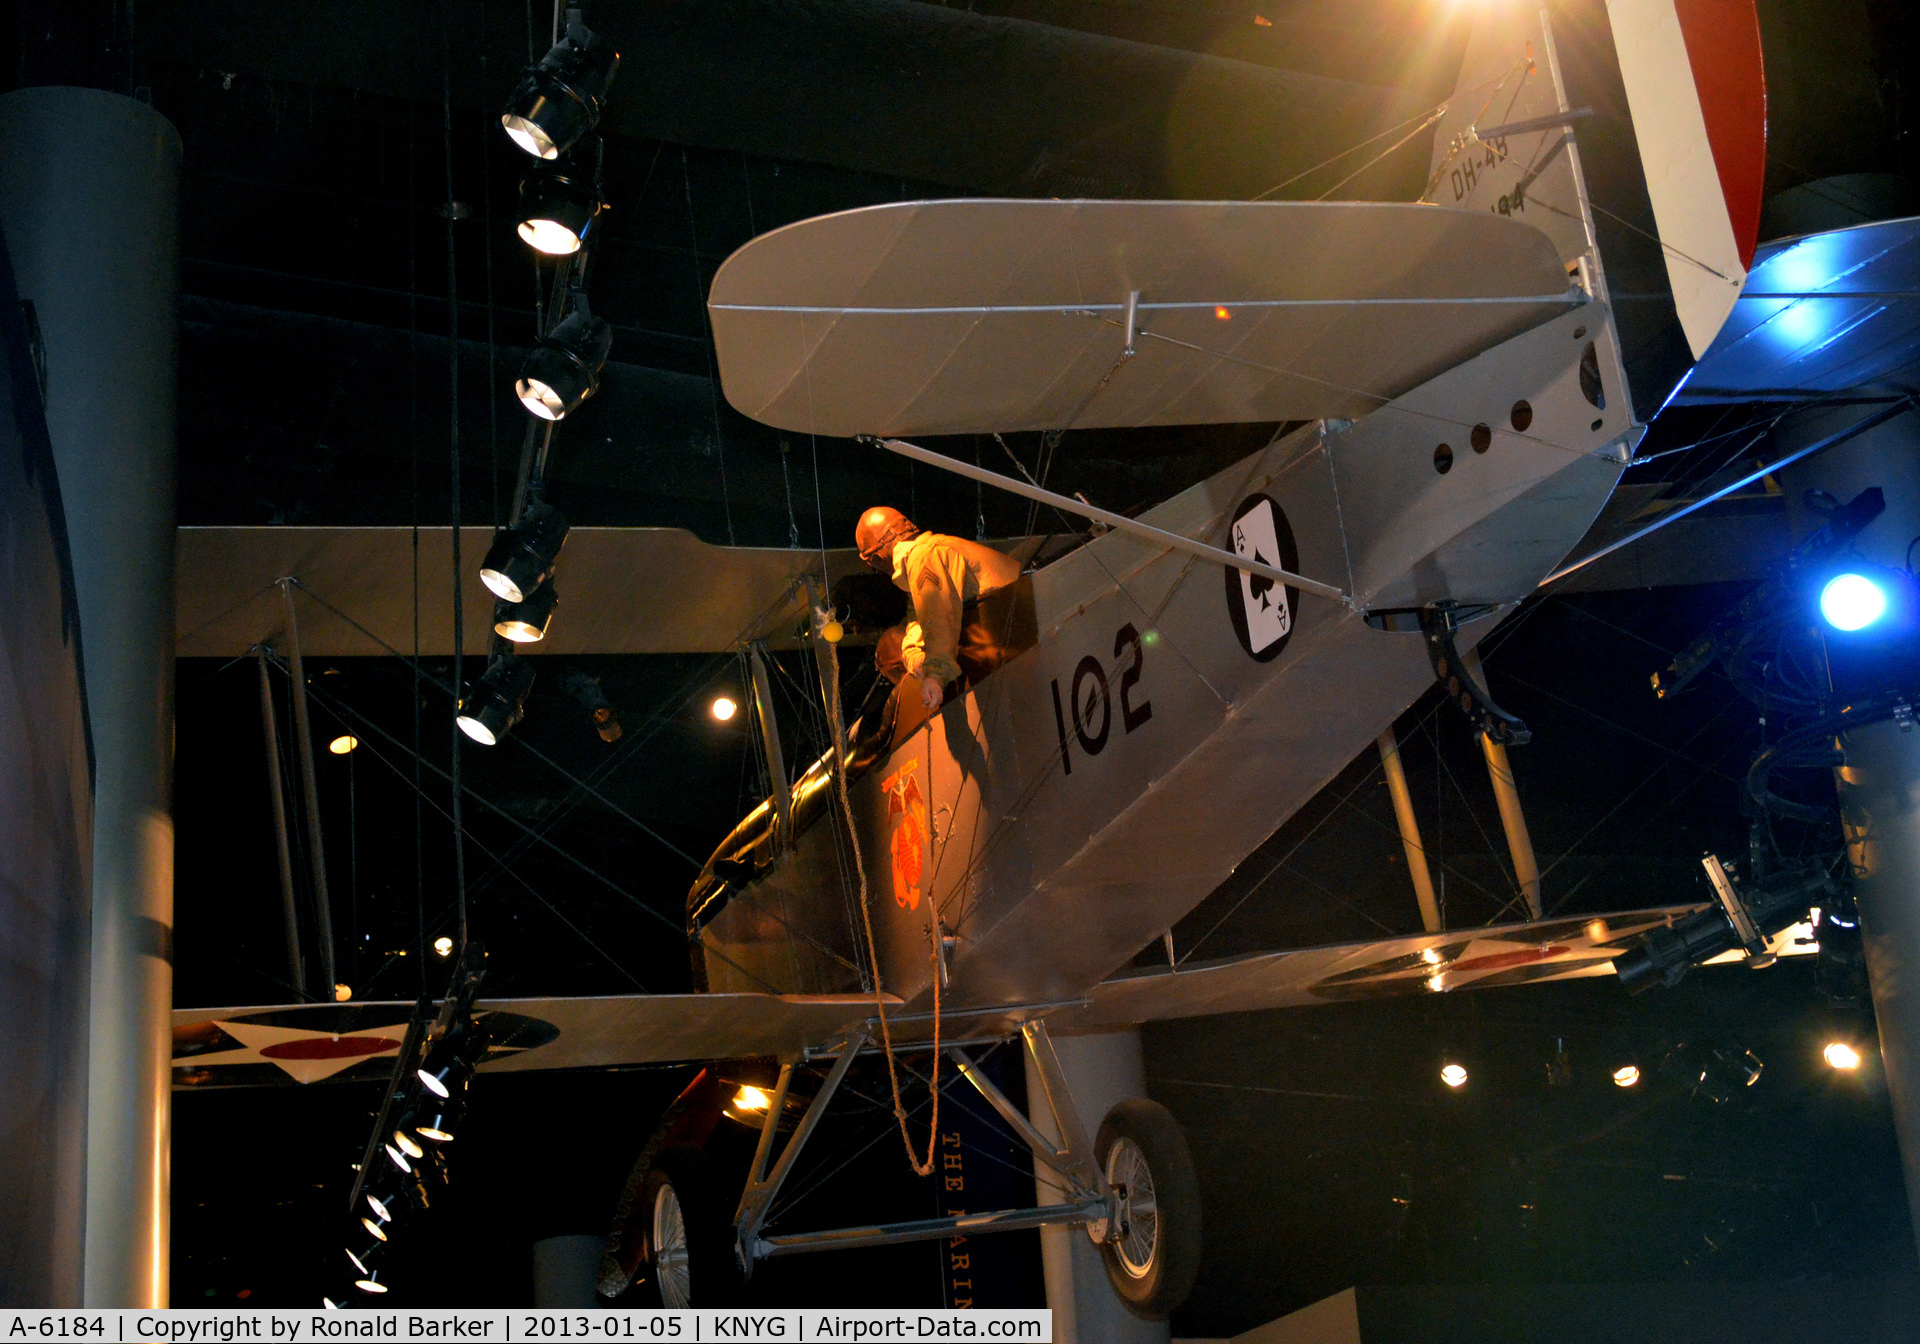 A-6184, Dayton-Wright DH-4 (replica) C/N Not found A-6184, DH-48 A-6184 USMC Museum